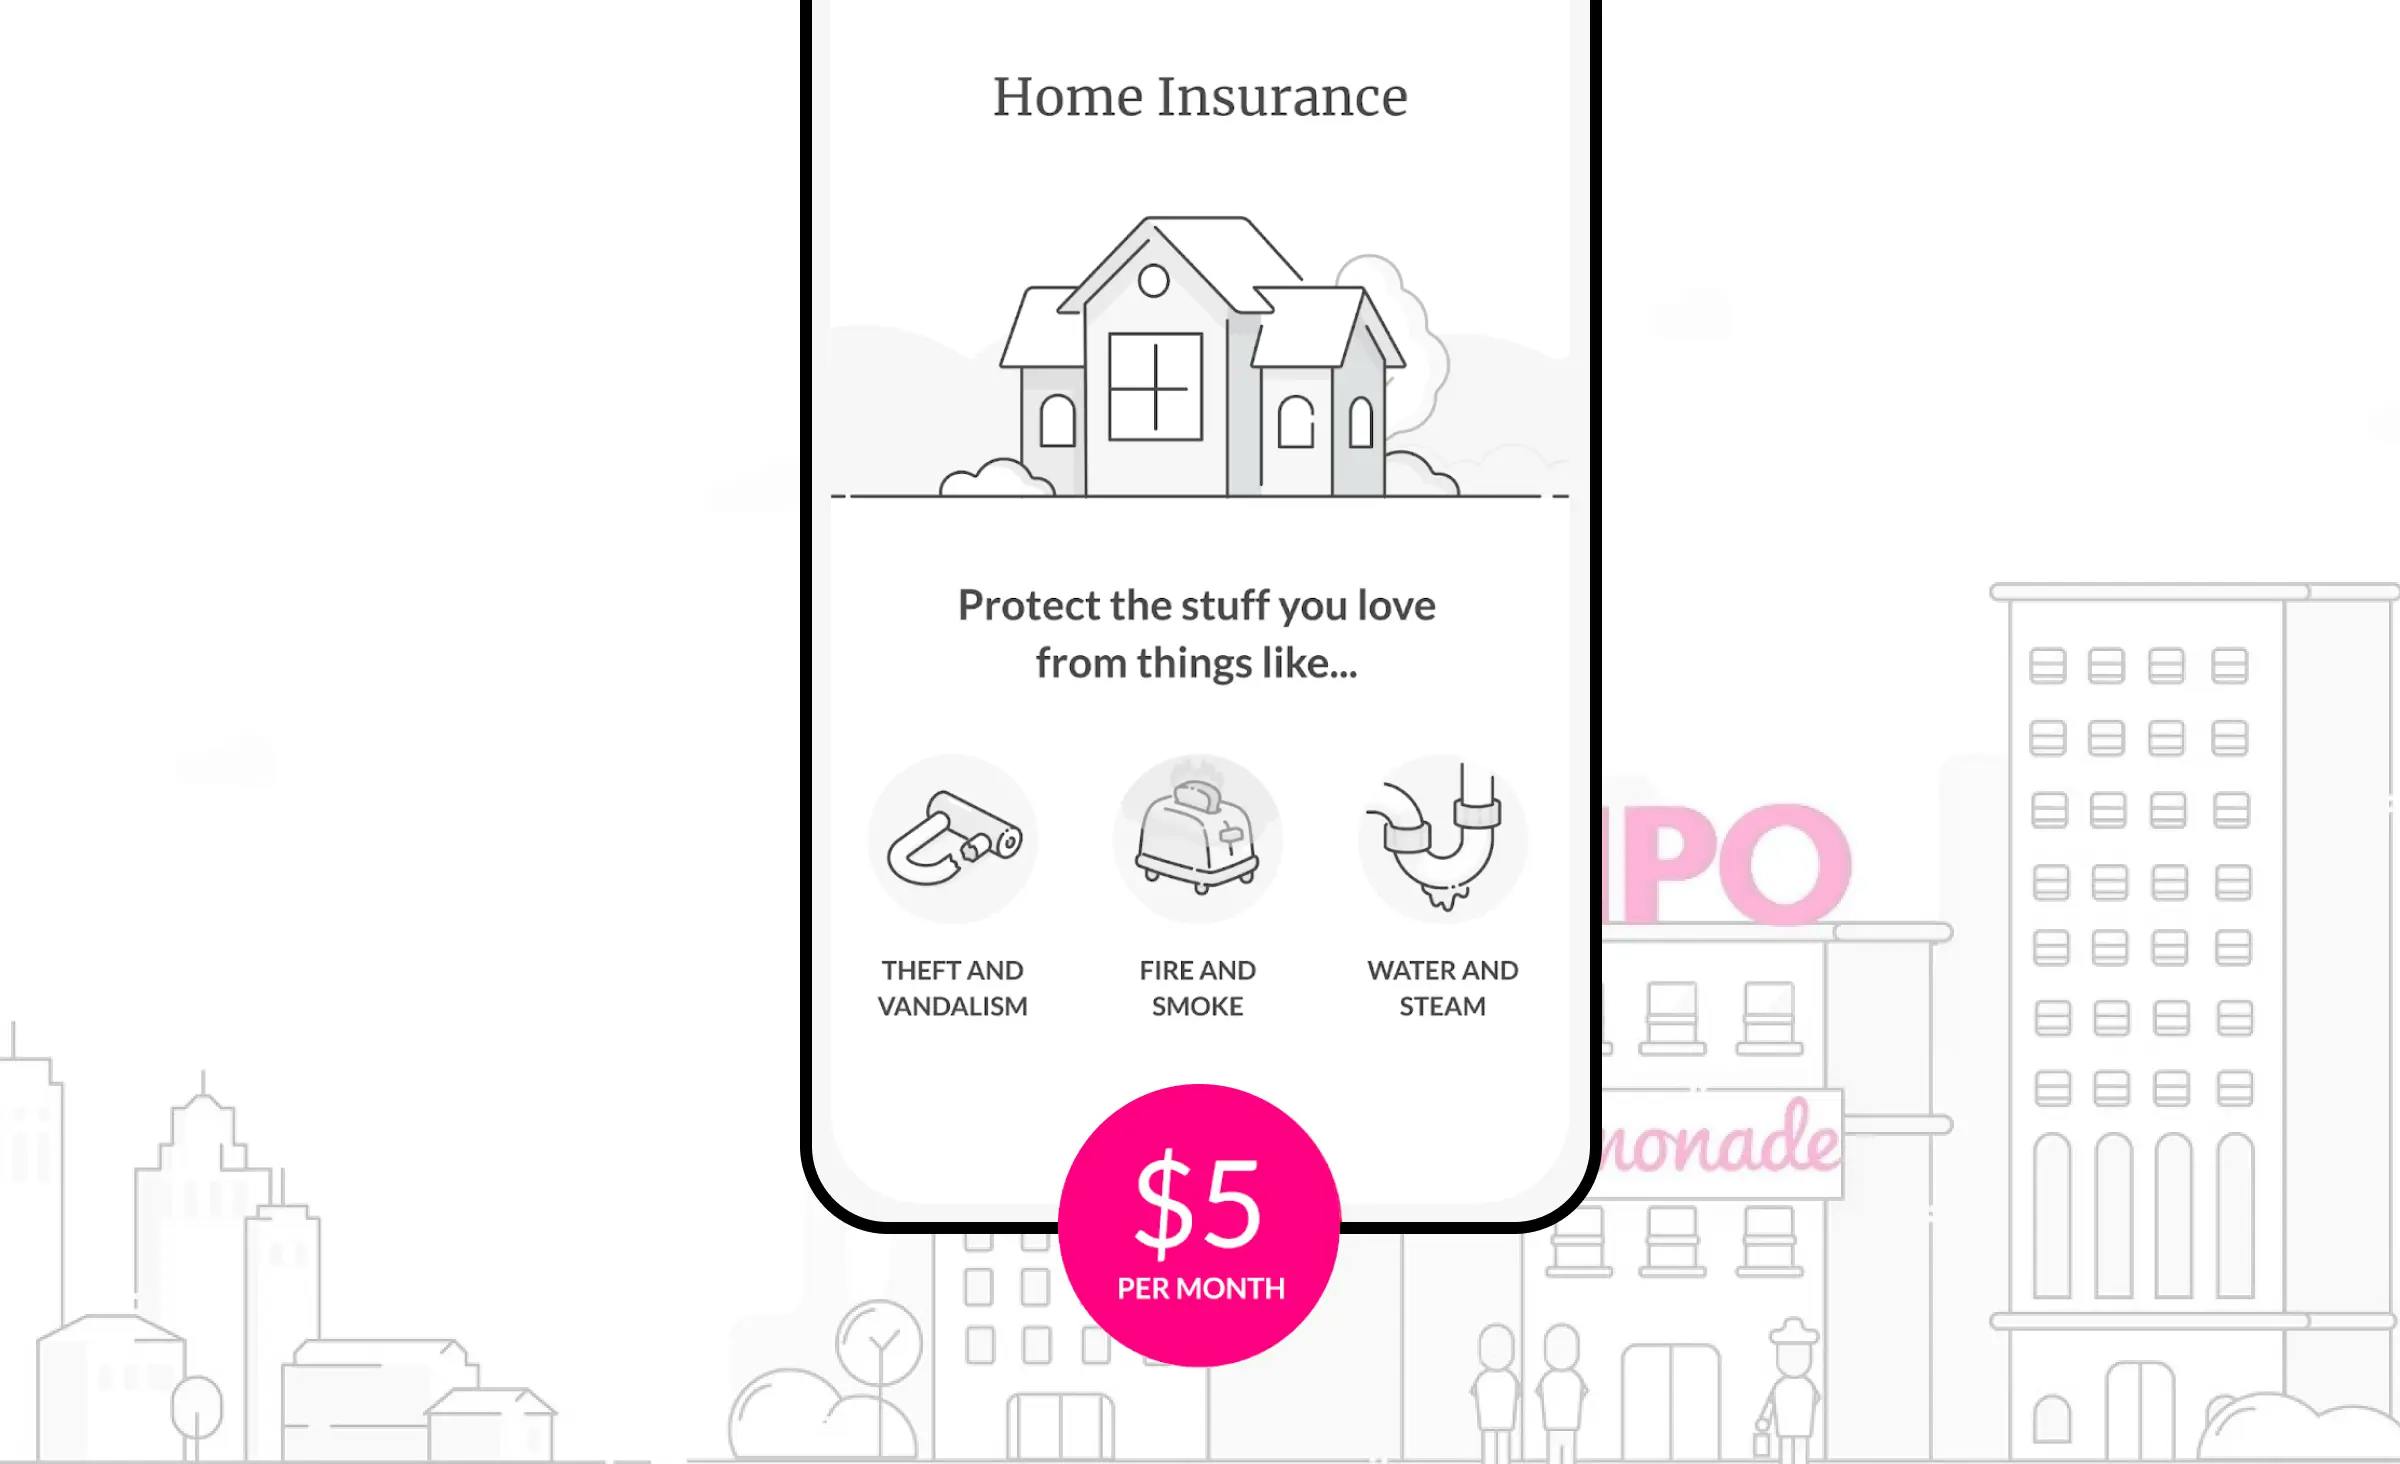 A screenshot of the Lemonade insurance mobile app displaying a home insurance screen. The screen features a house icon and the quote "Protect the stuff you love from things like... theft and vandalism, fire and smoke, water and steam." Each type of insured event is accompanied by an illustration: a broken lock (representing theft and vandalism), a steaming toaster (representing fire and smoke), and a leaking sink pipe (representing water and steam).